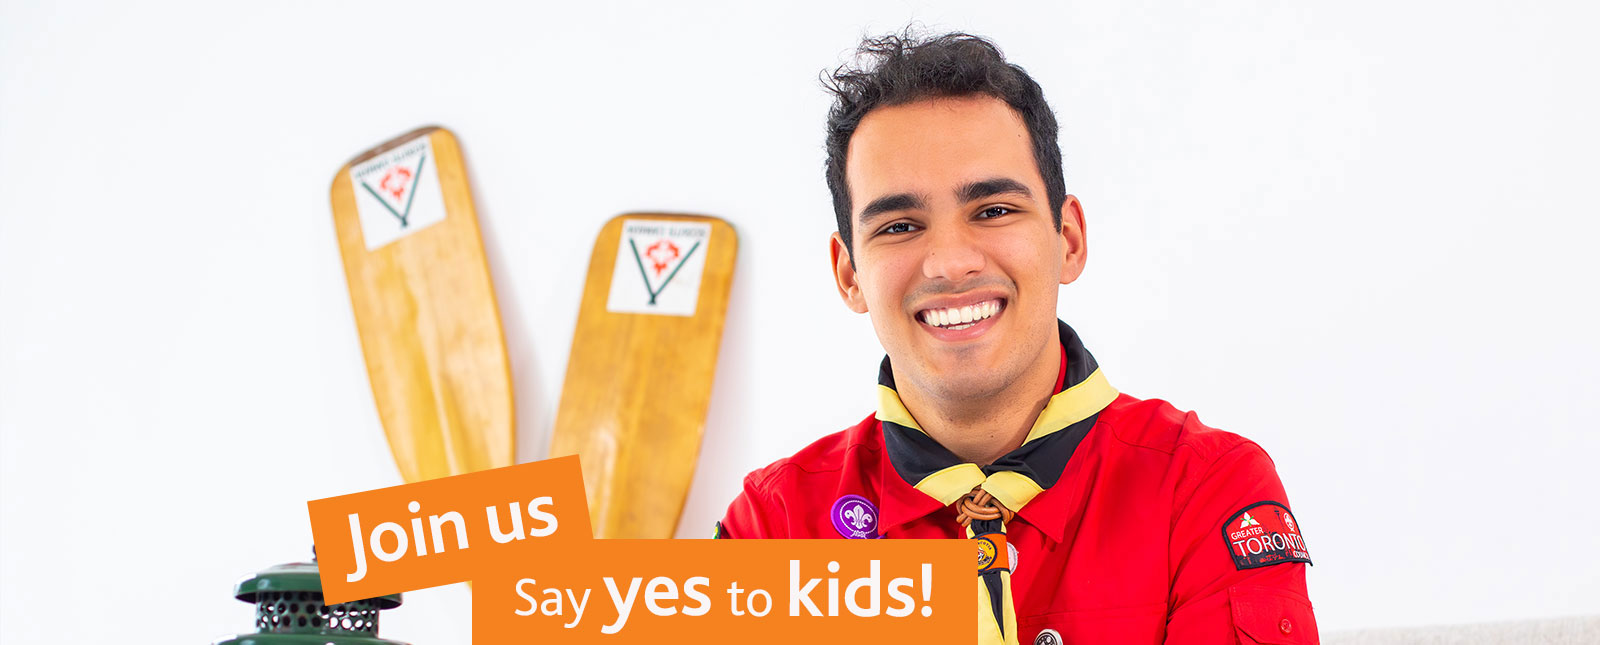 Join us and Volunteer with Scouts